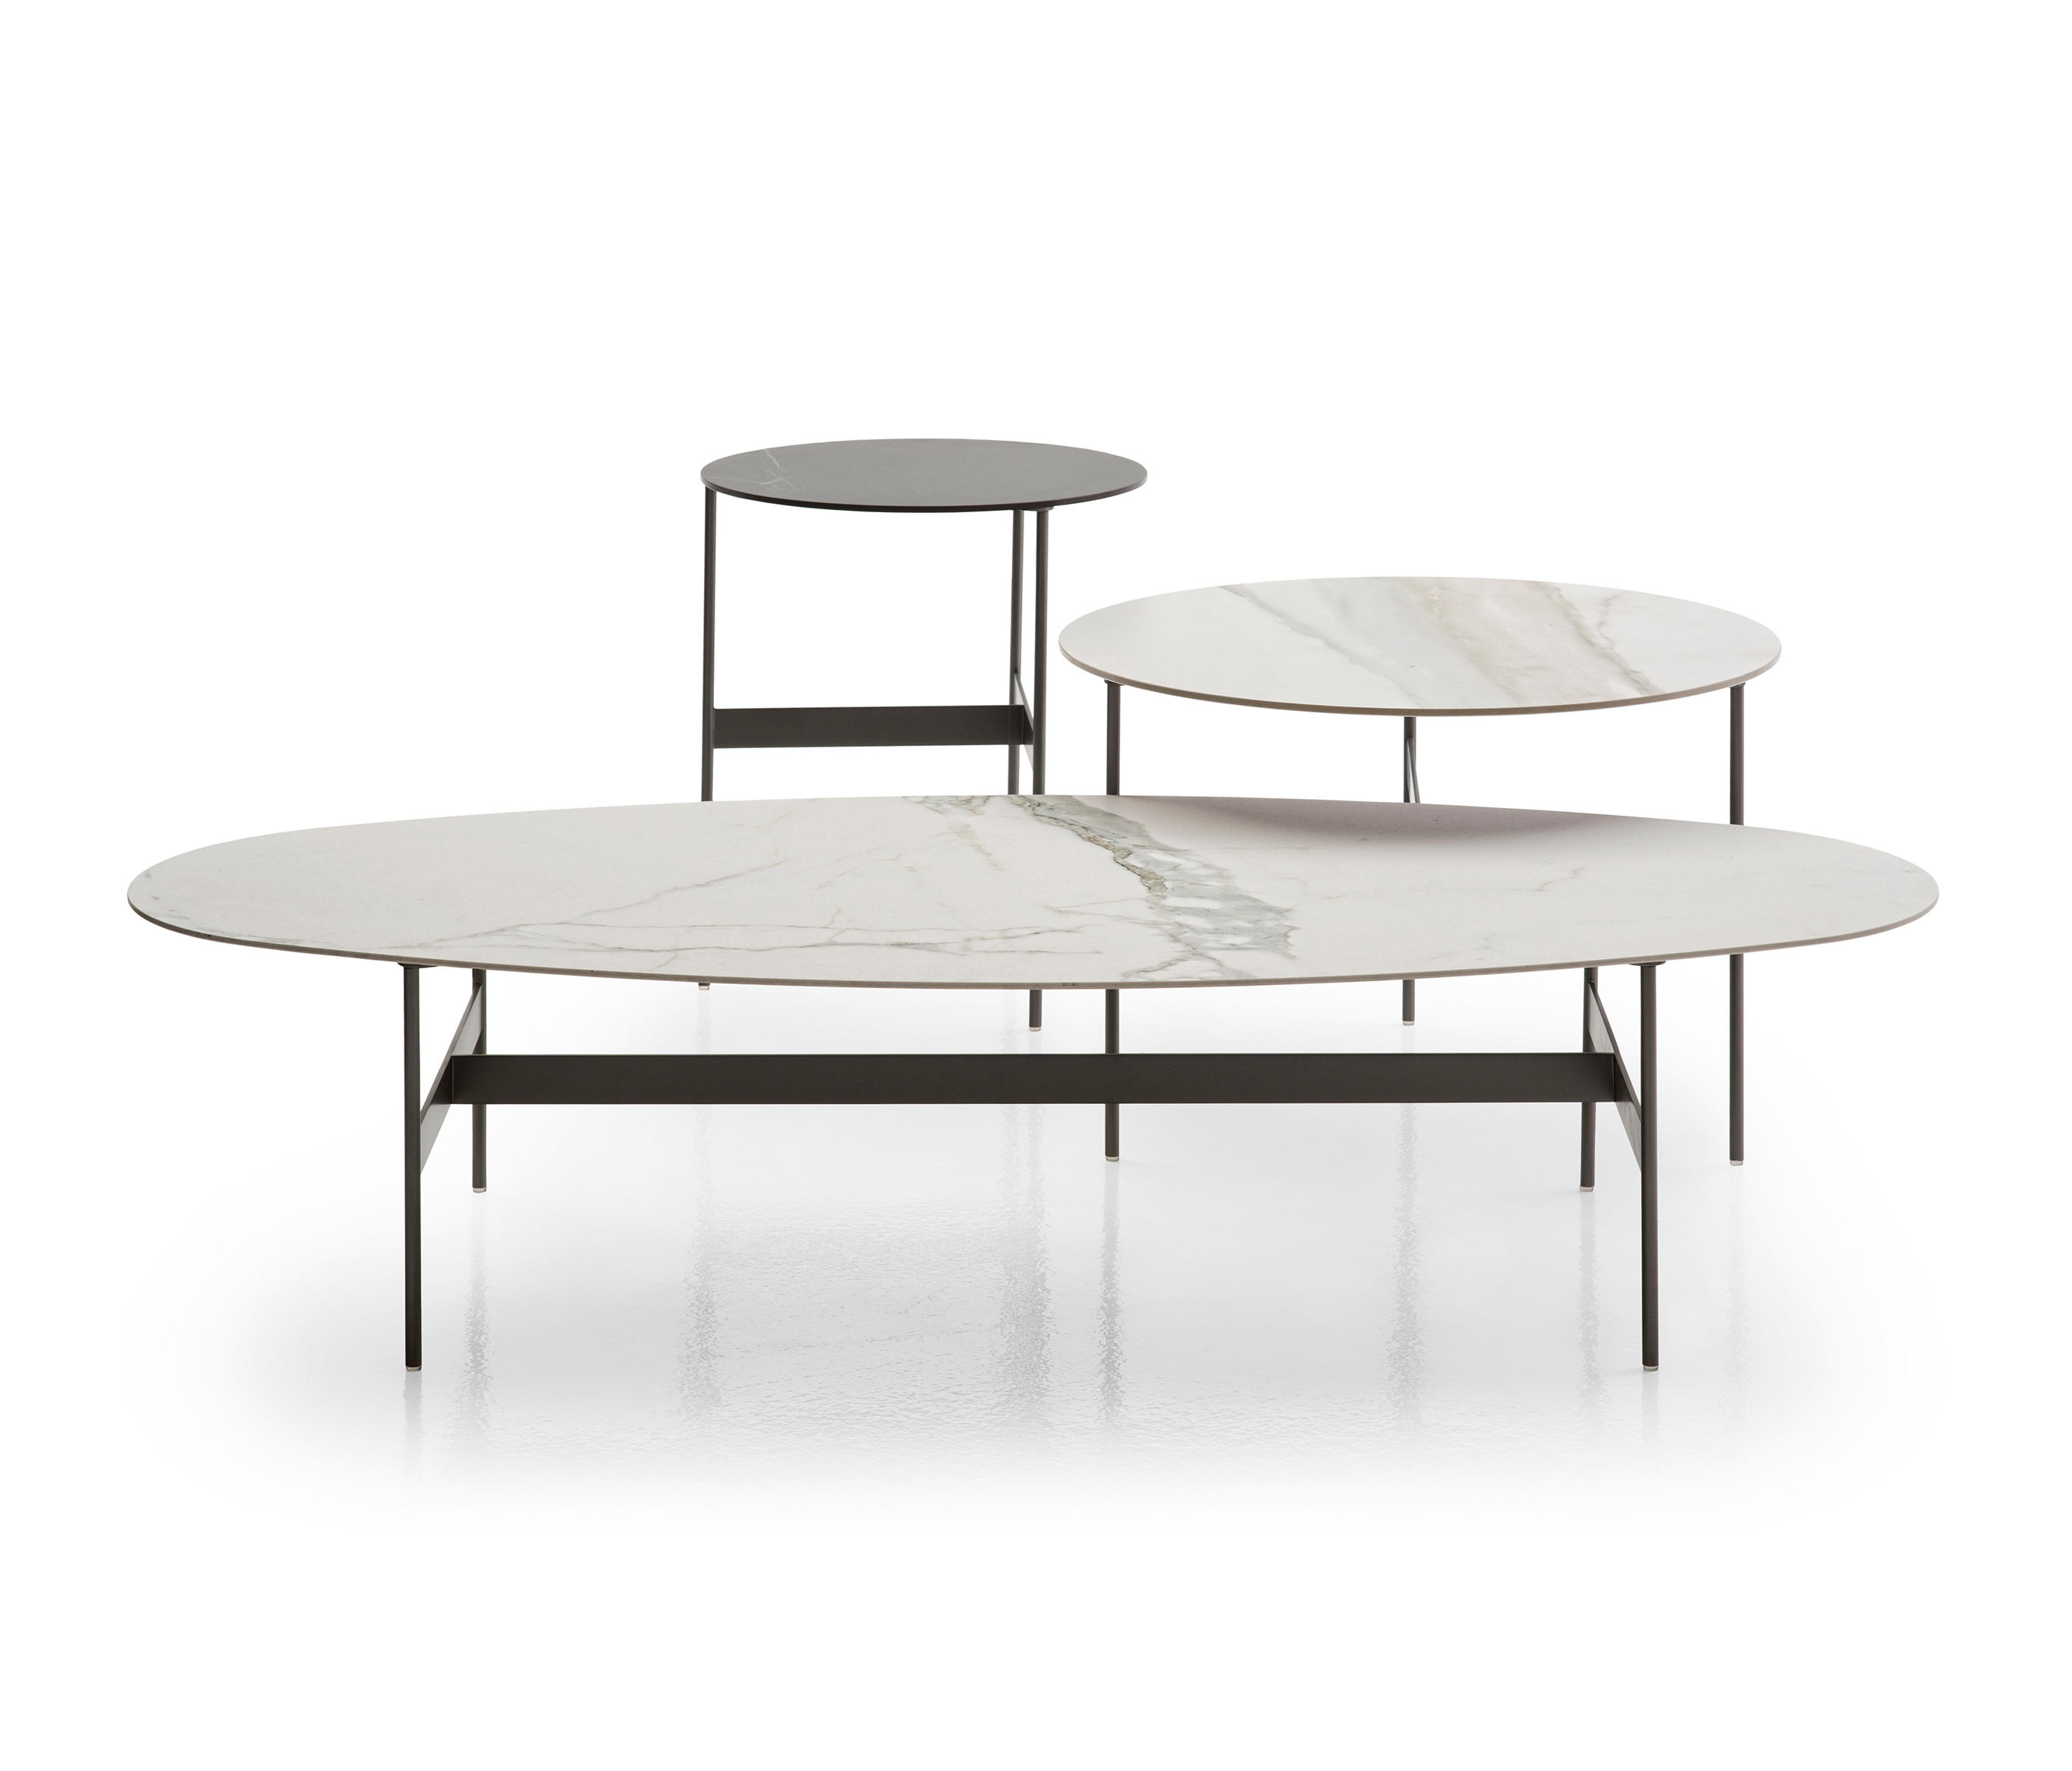 FORMICHE - Coffee tables from B&B Italia | Architonic